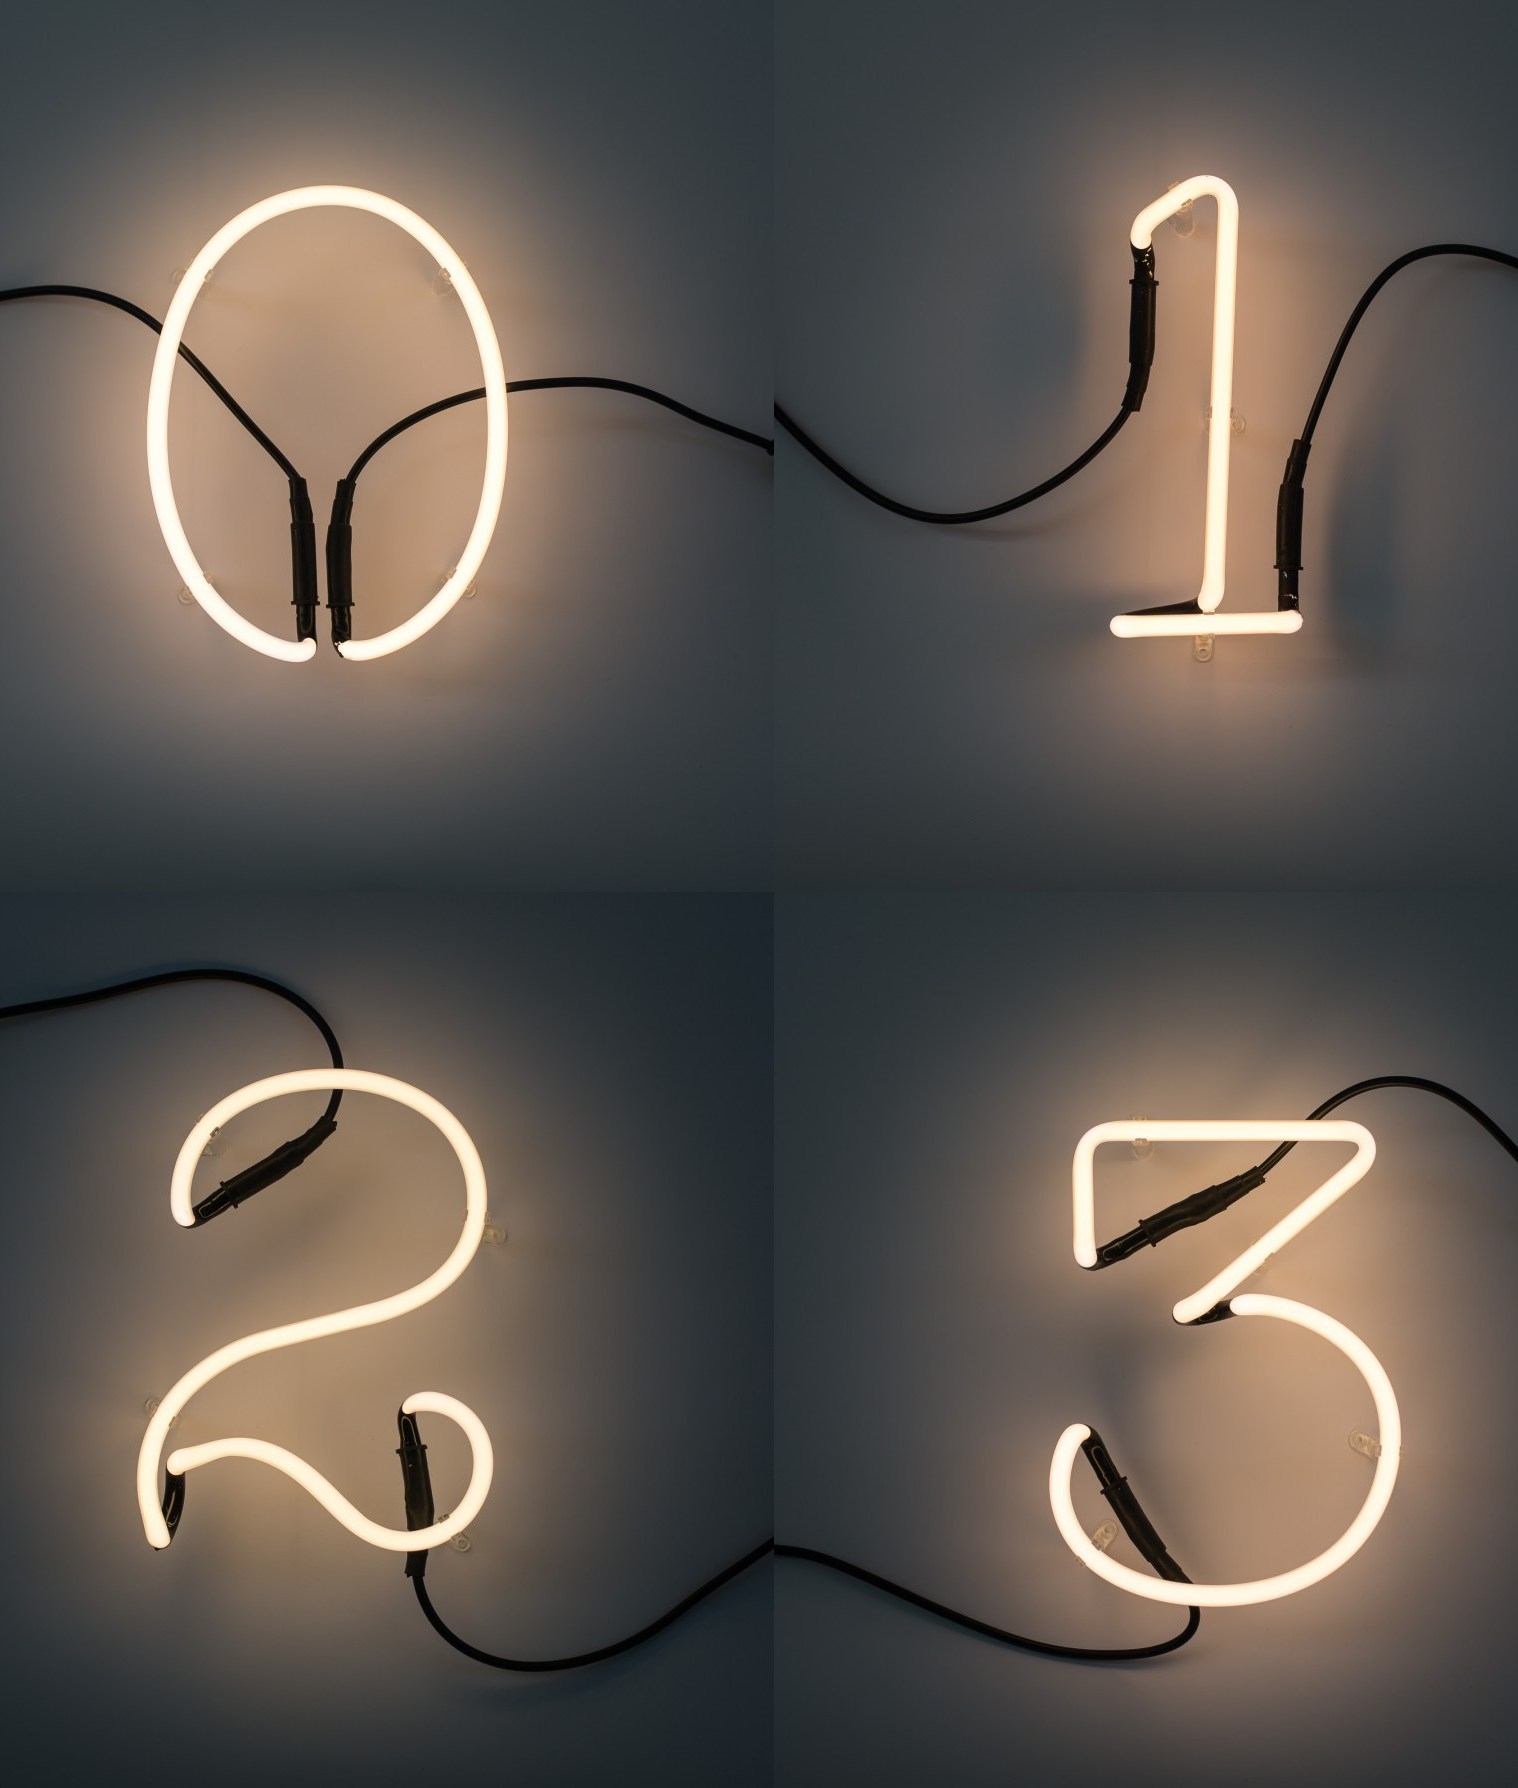 Linkable Neon Numbers and Symbols Perfect for Home or Commercial Use